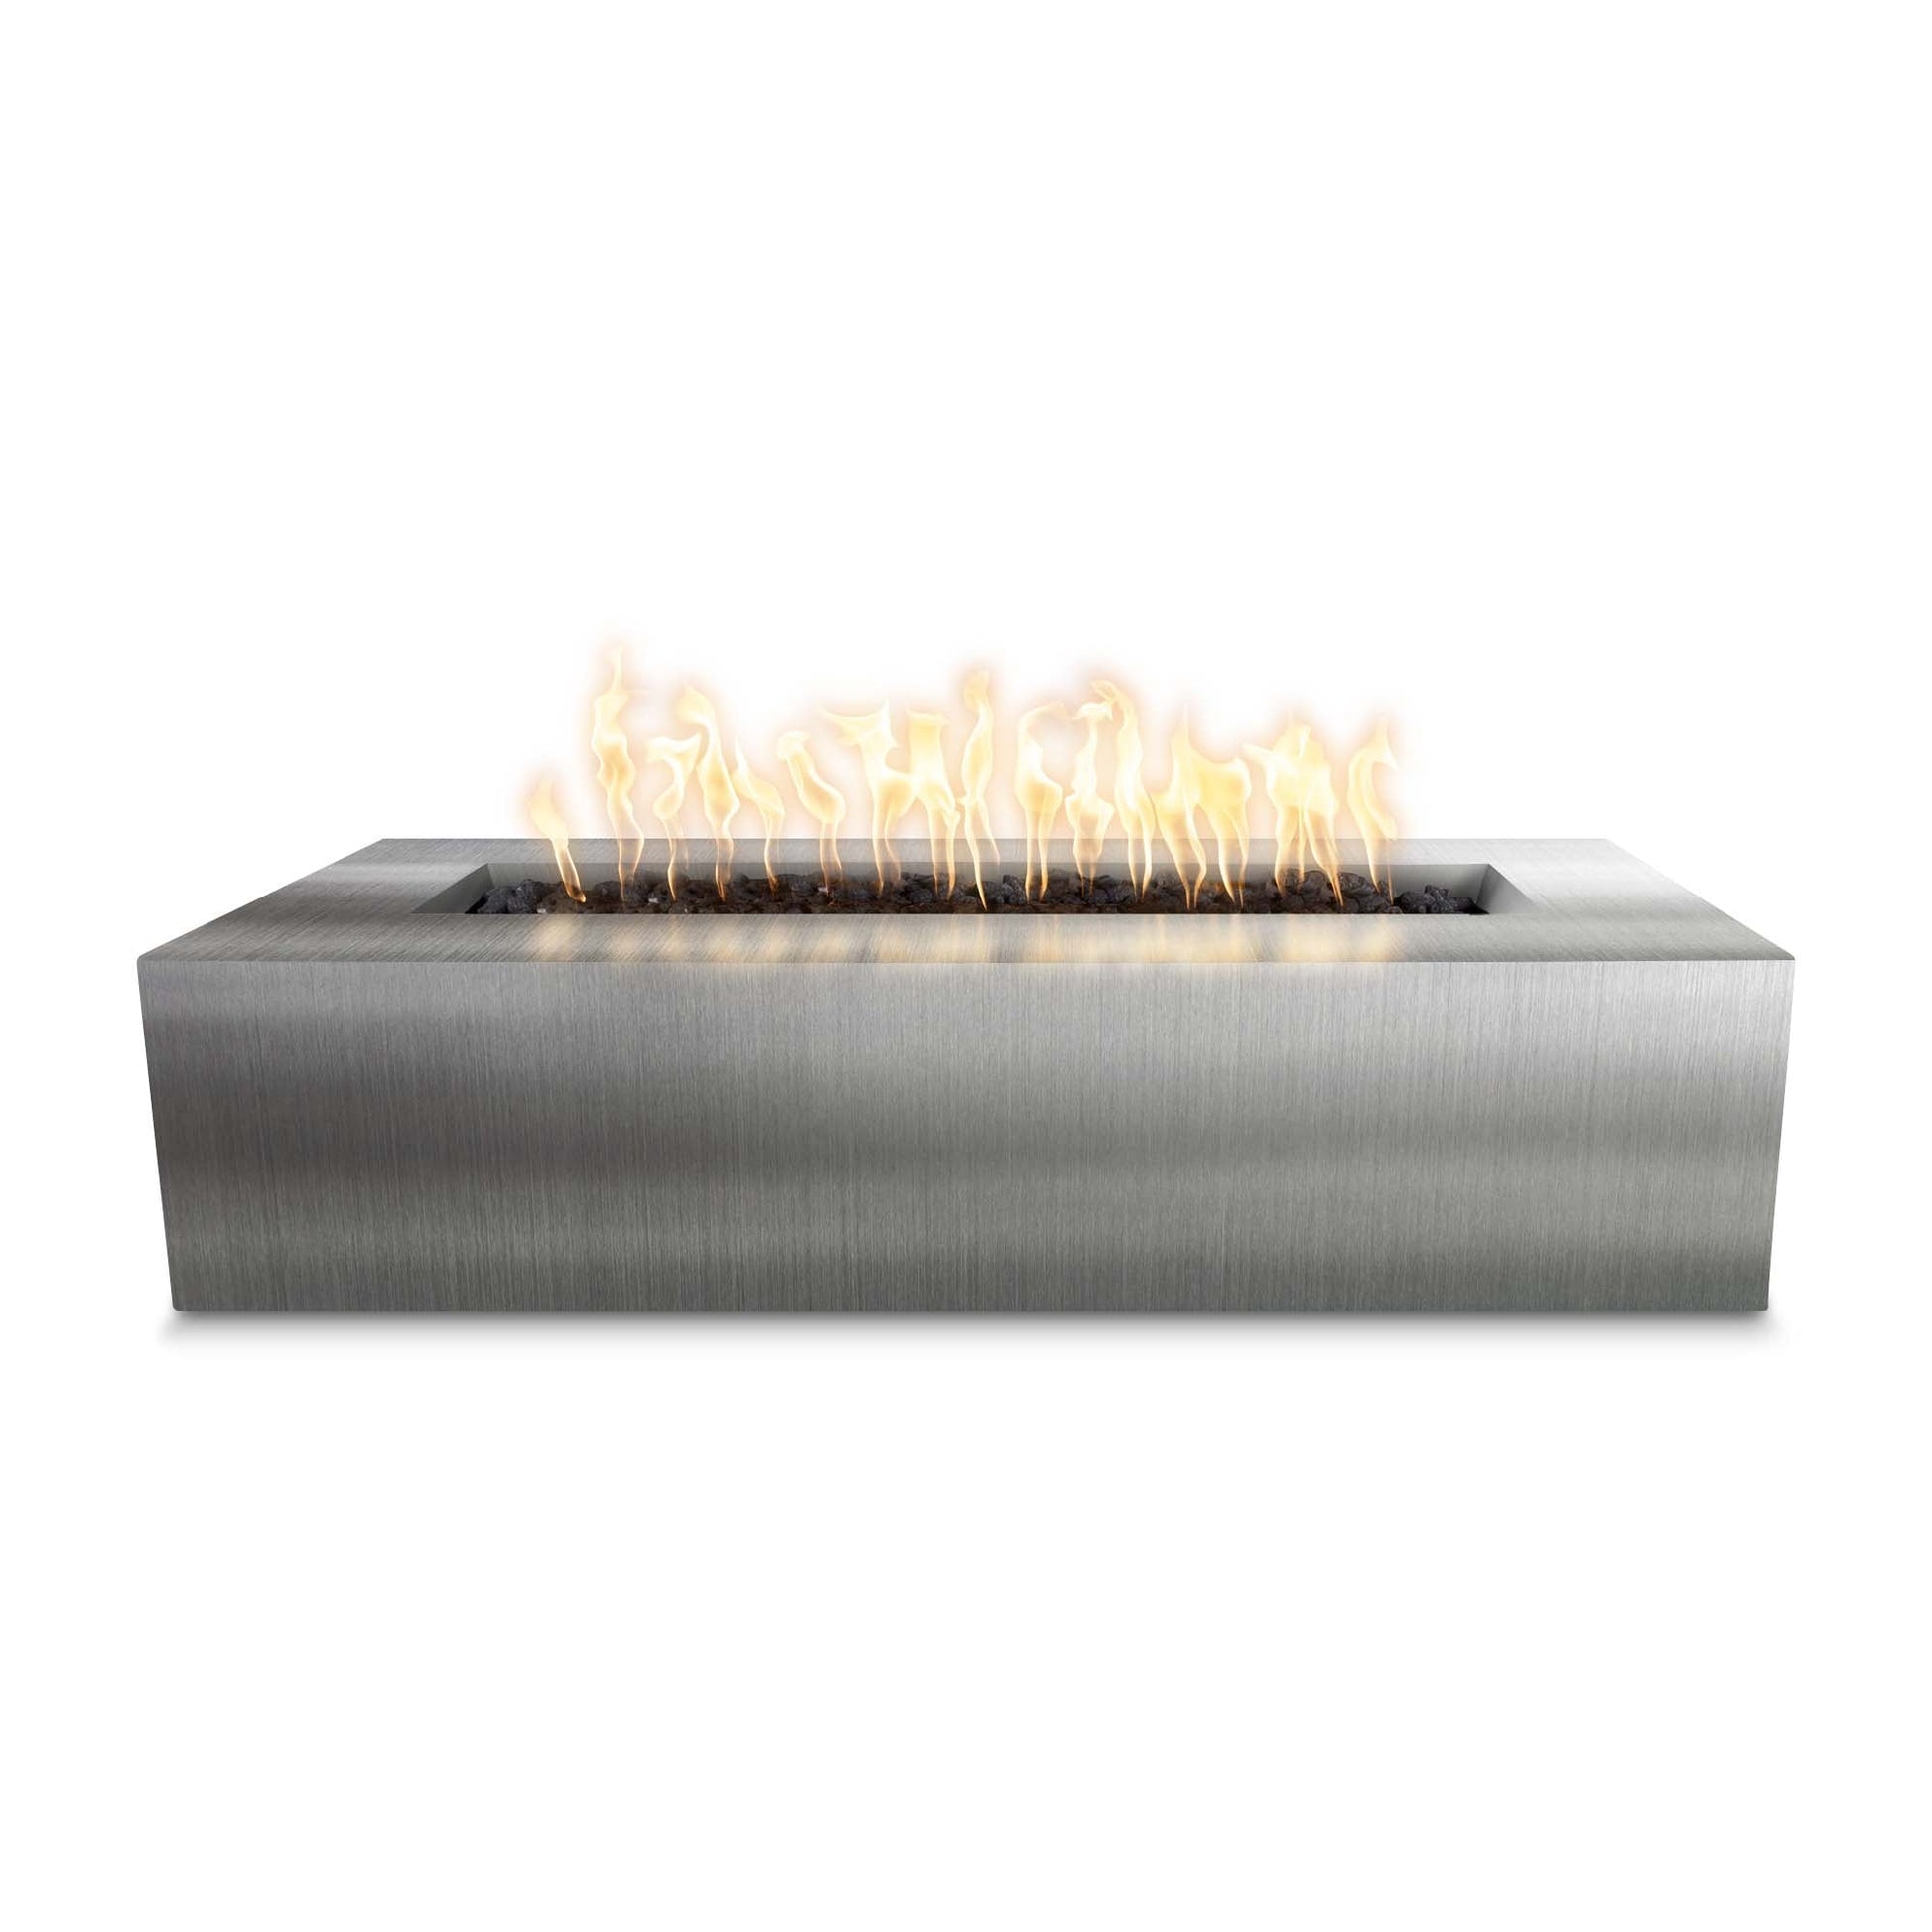 The Outdoor Plus Rectangular Regal 54" Corten Steel Natural Gas Fire Pit with Flame Sense with Spark Ignition